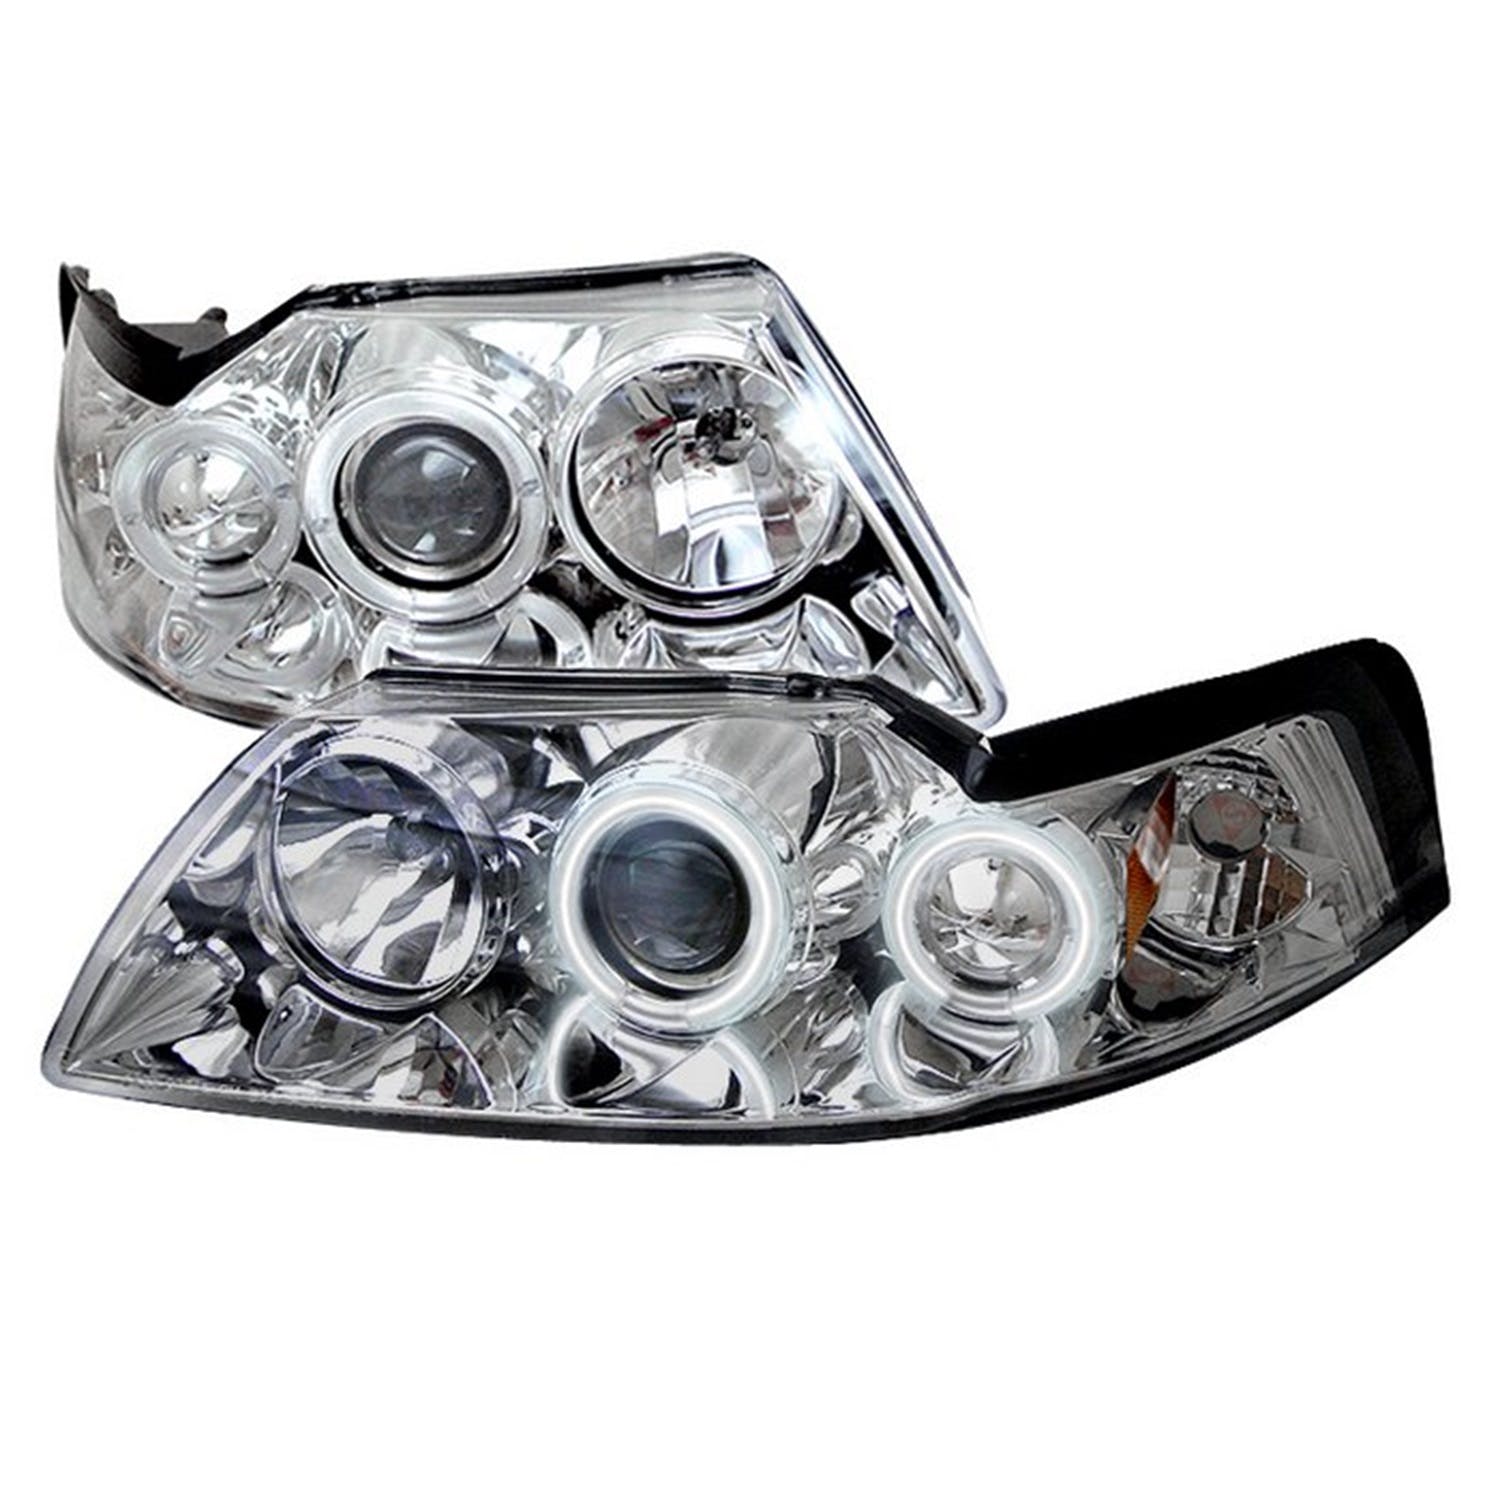 Spyder Auto 5010483 ( SPYDER ) FORD MUSTANG 99-04 PROJECTOR HEADLIGHTS-CCFL HALO-CHROME-HIGH H1 (INC